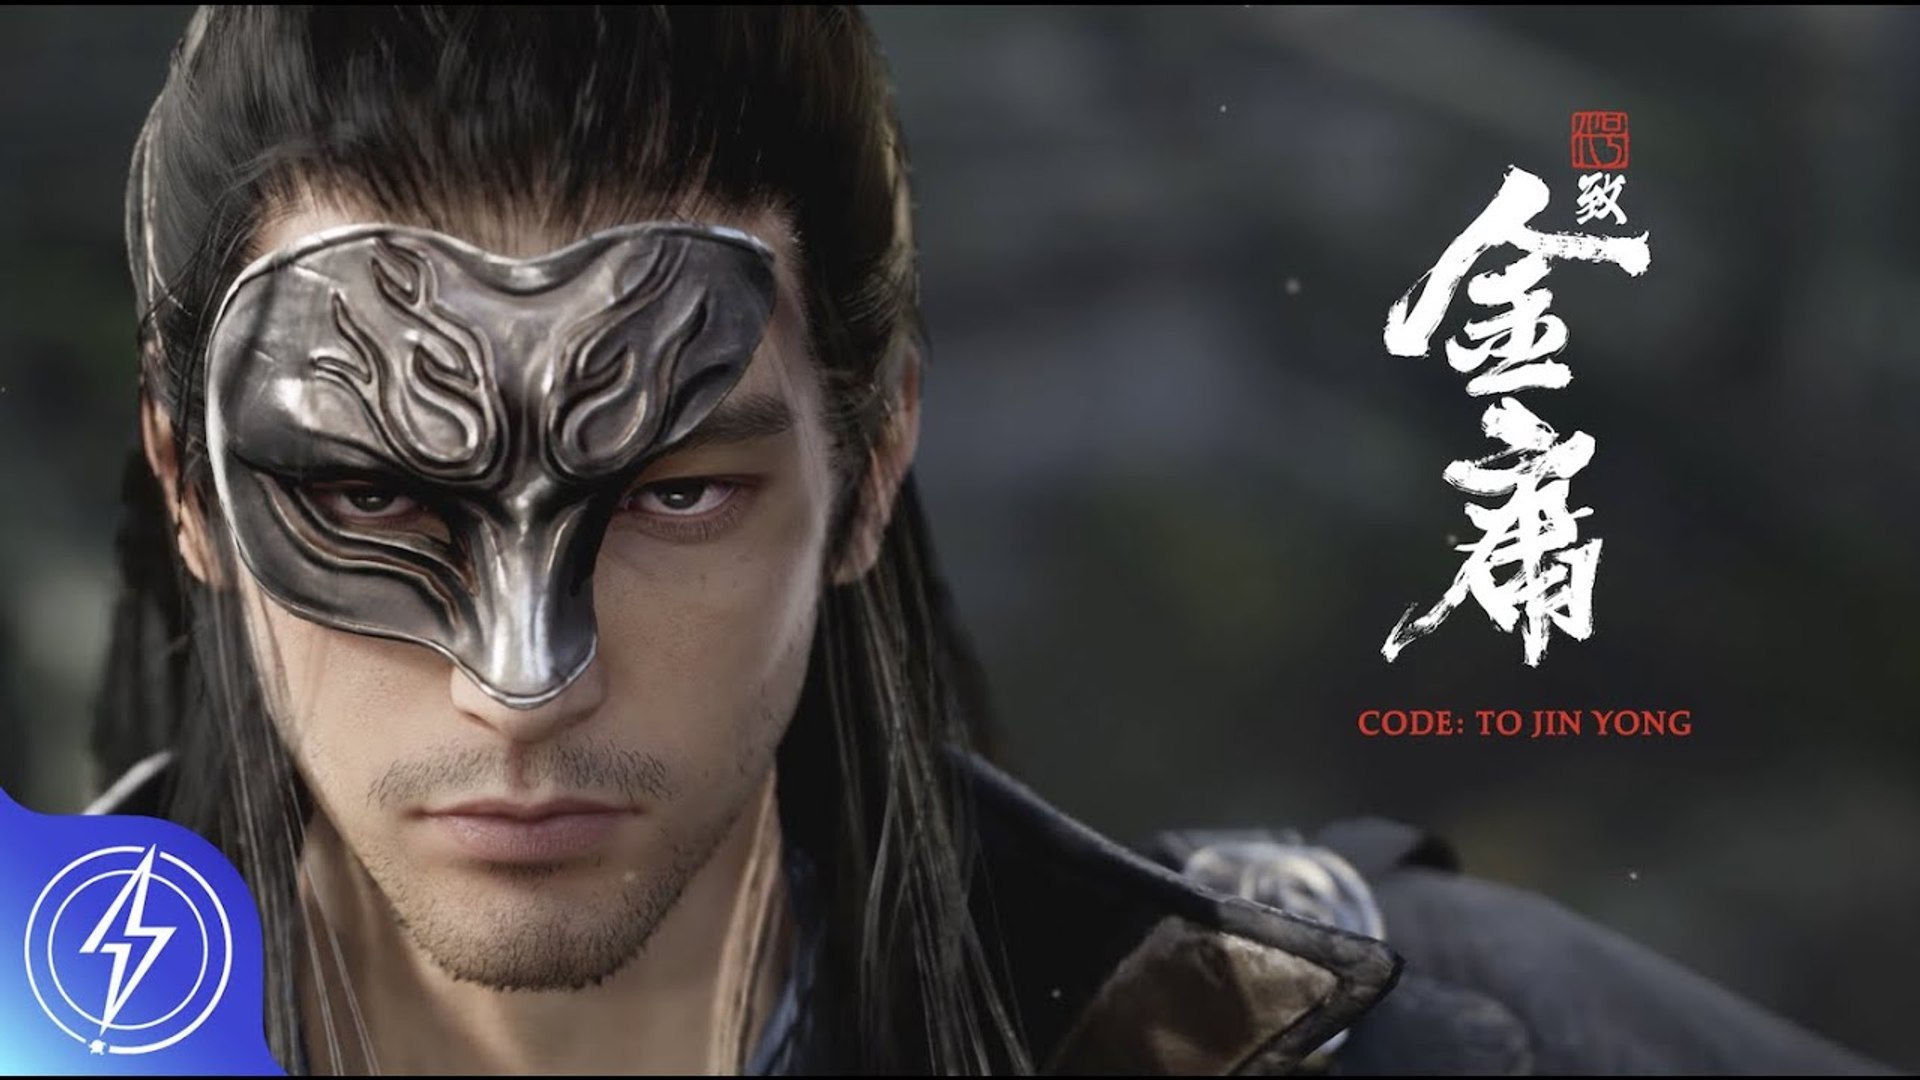 Code: To Jin Yong - Trailer d'annonce (Unreal Engine 5)